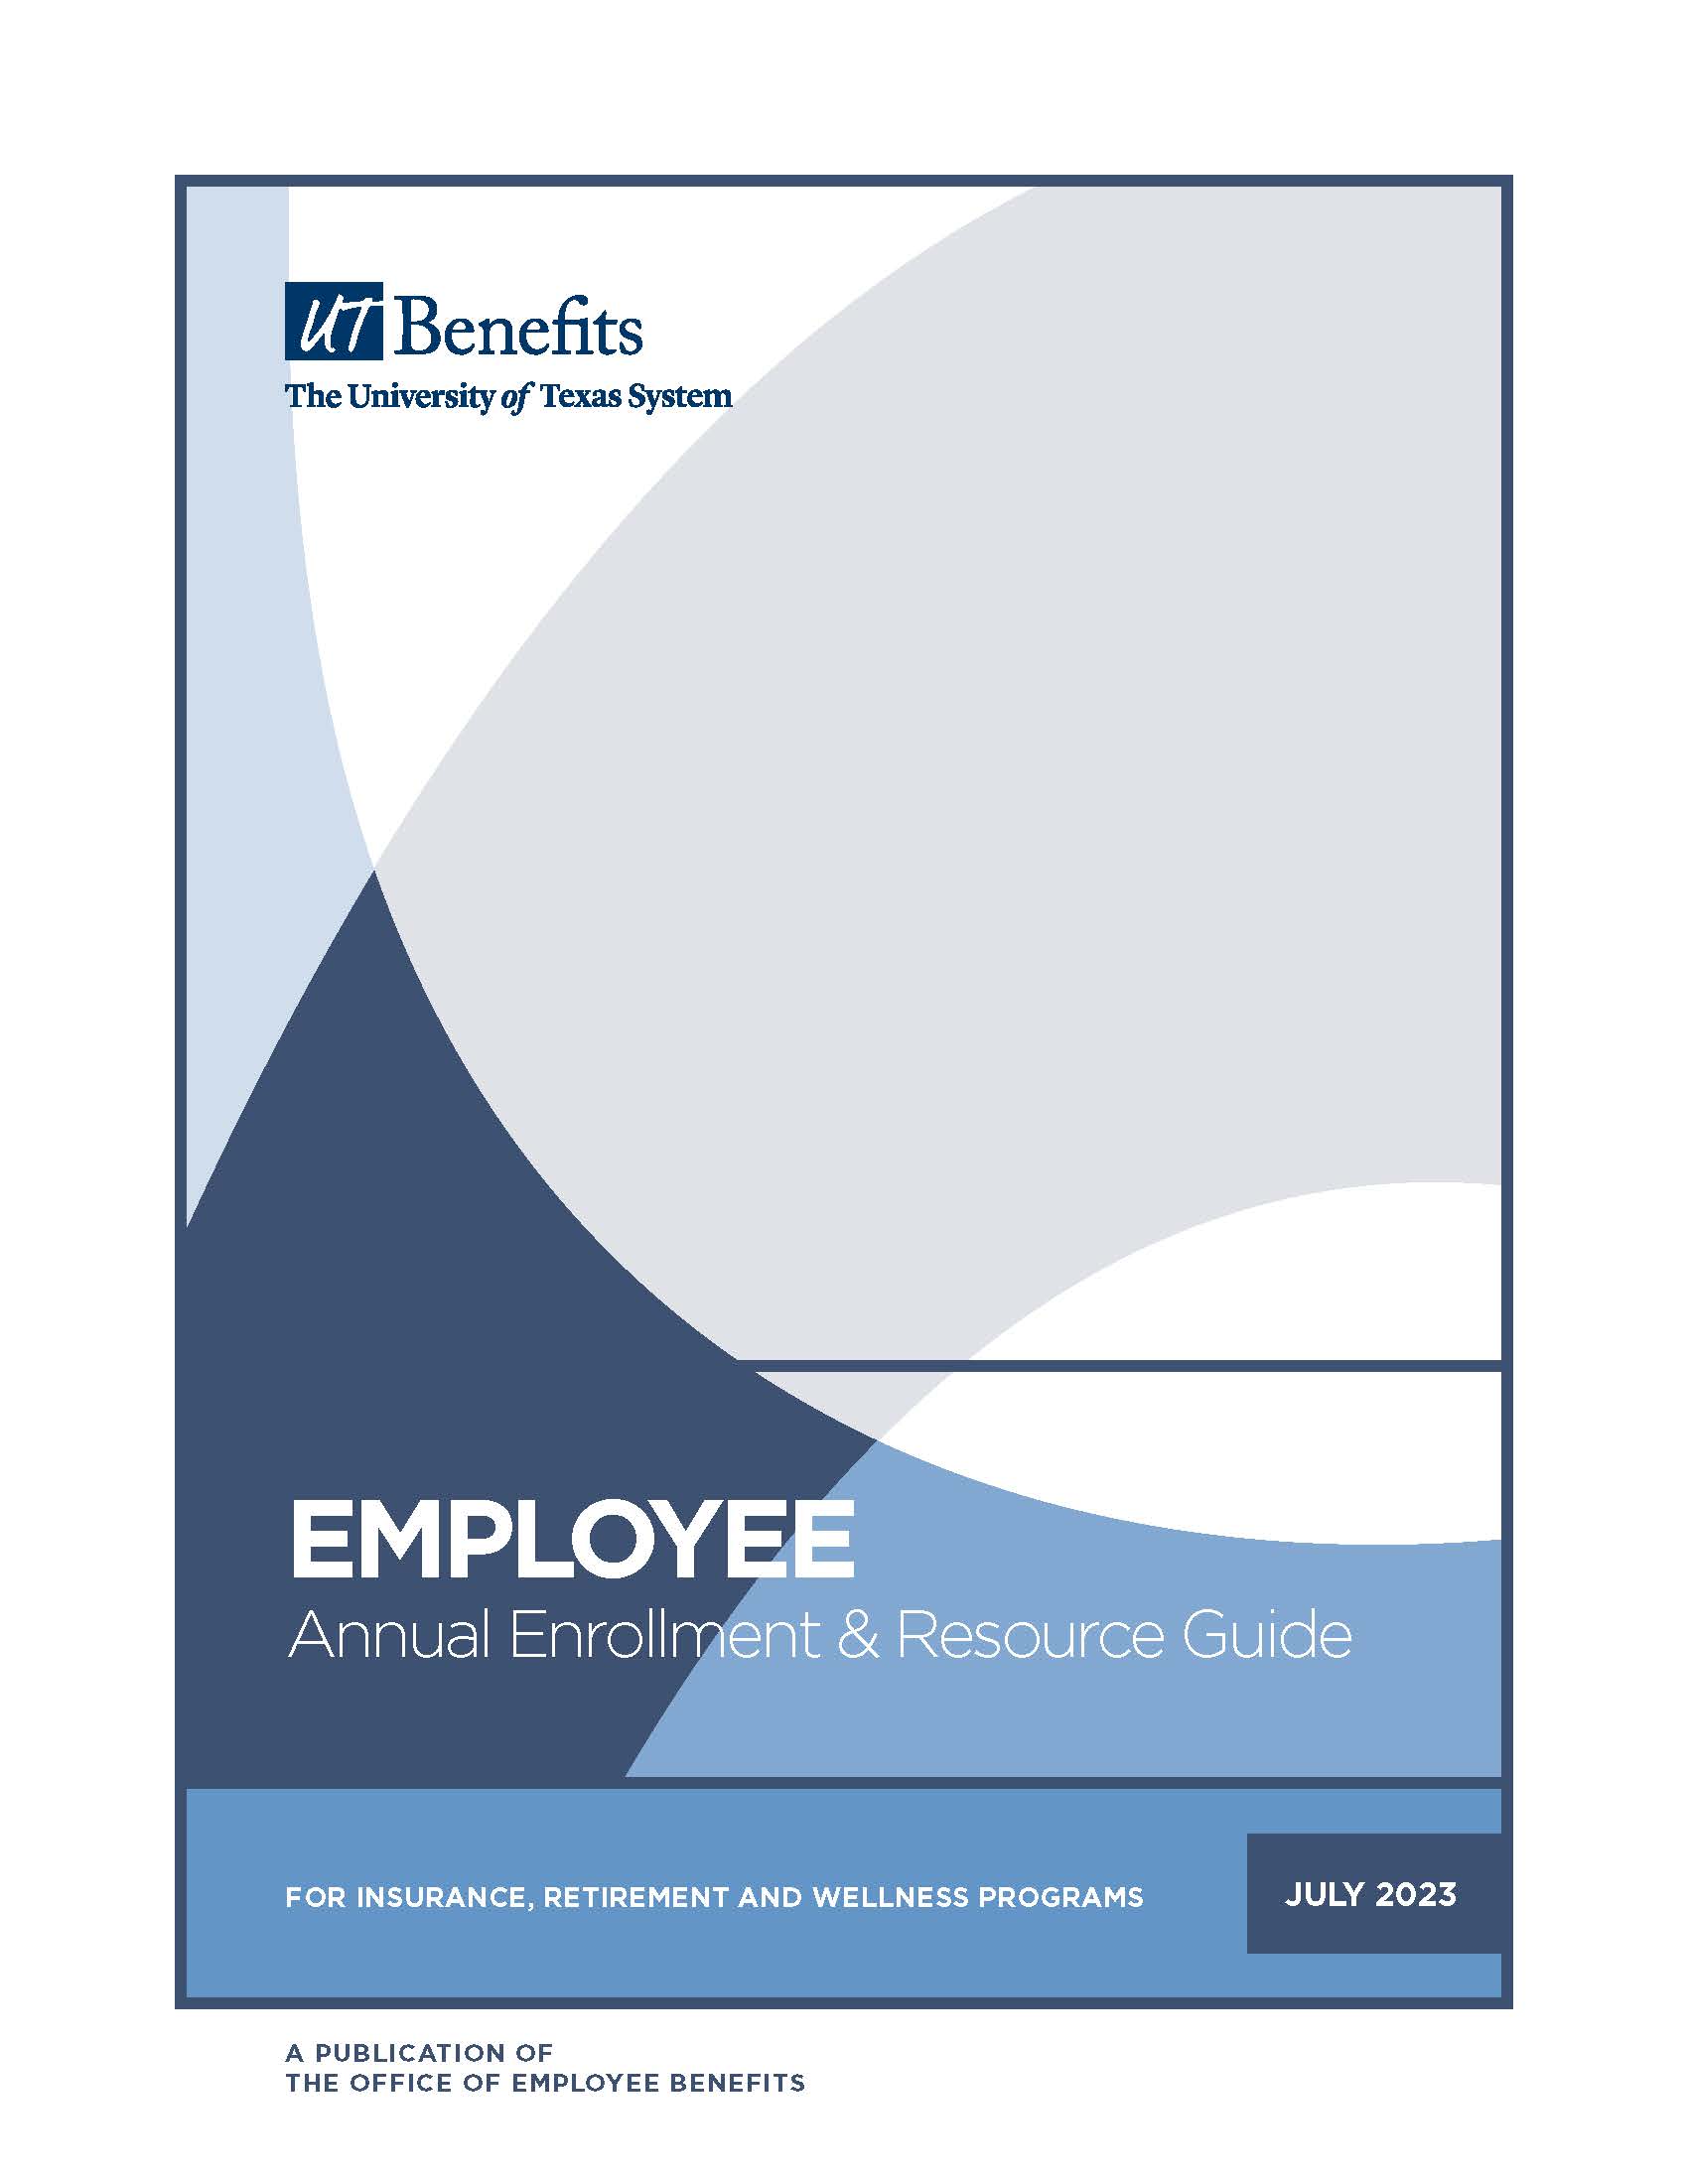 2023 Annual Enrollment Resources Guide for Employees